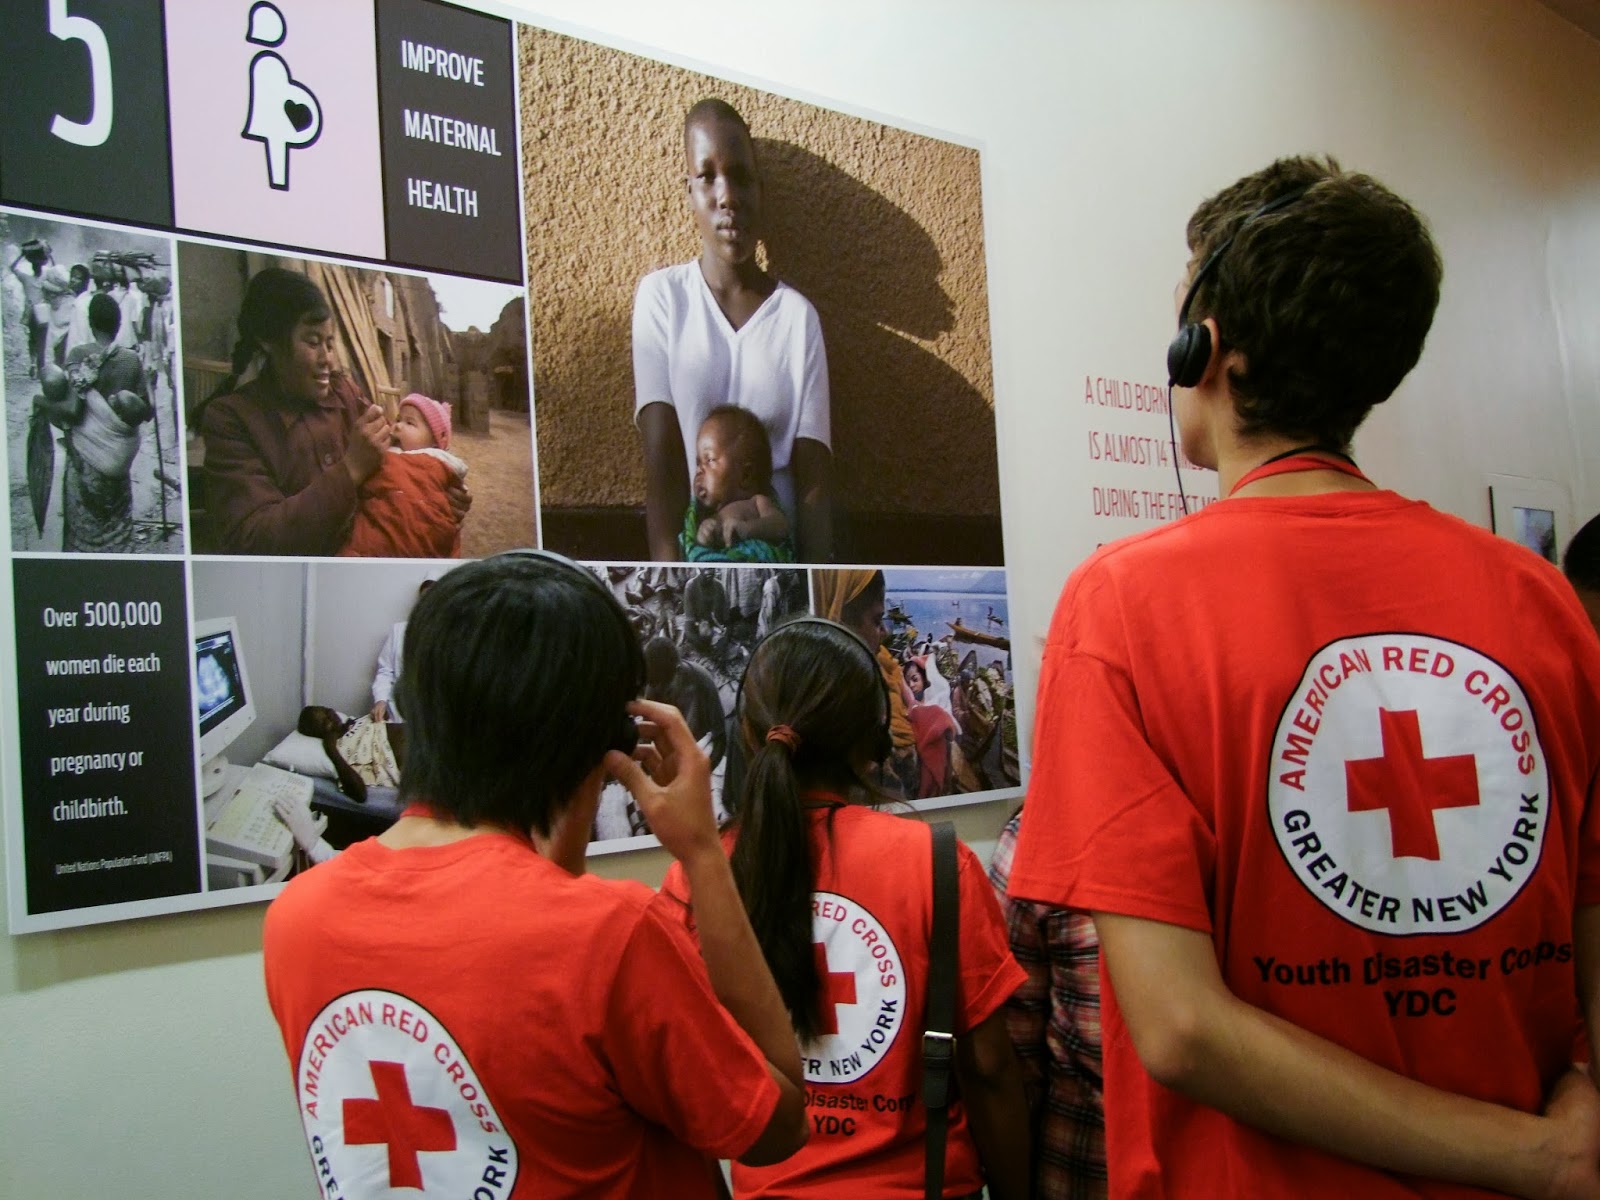 American Red Cross Greater New York Youth Campaign